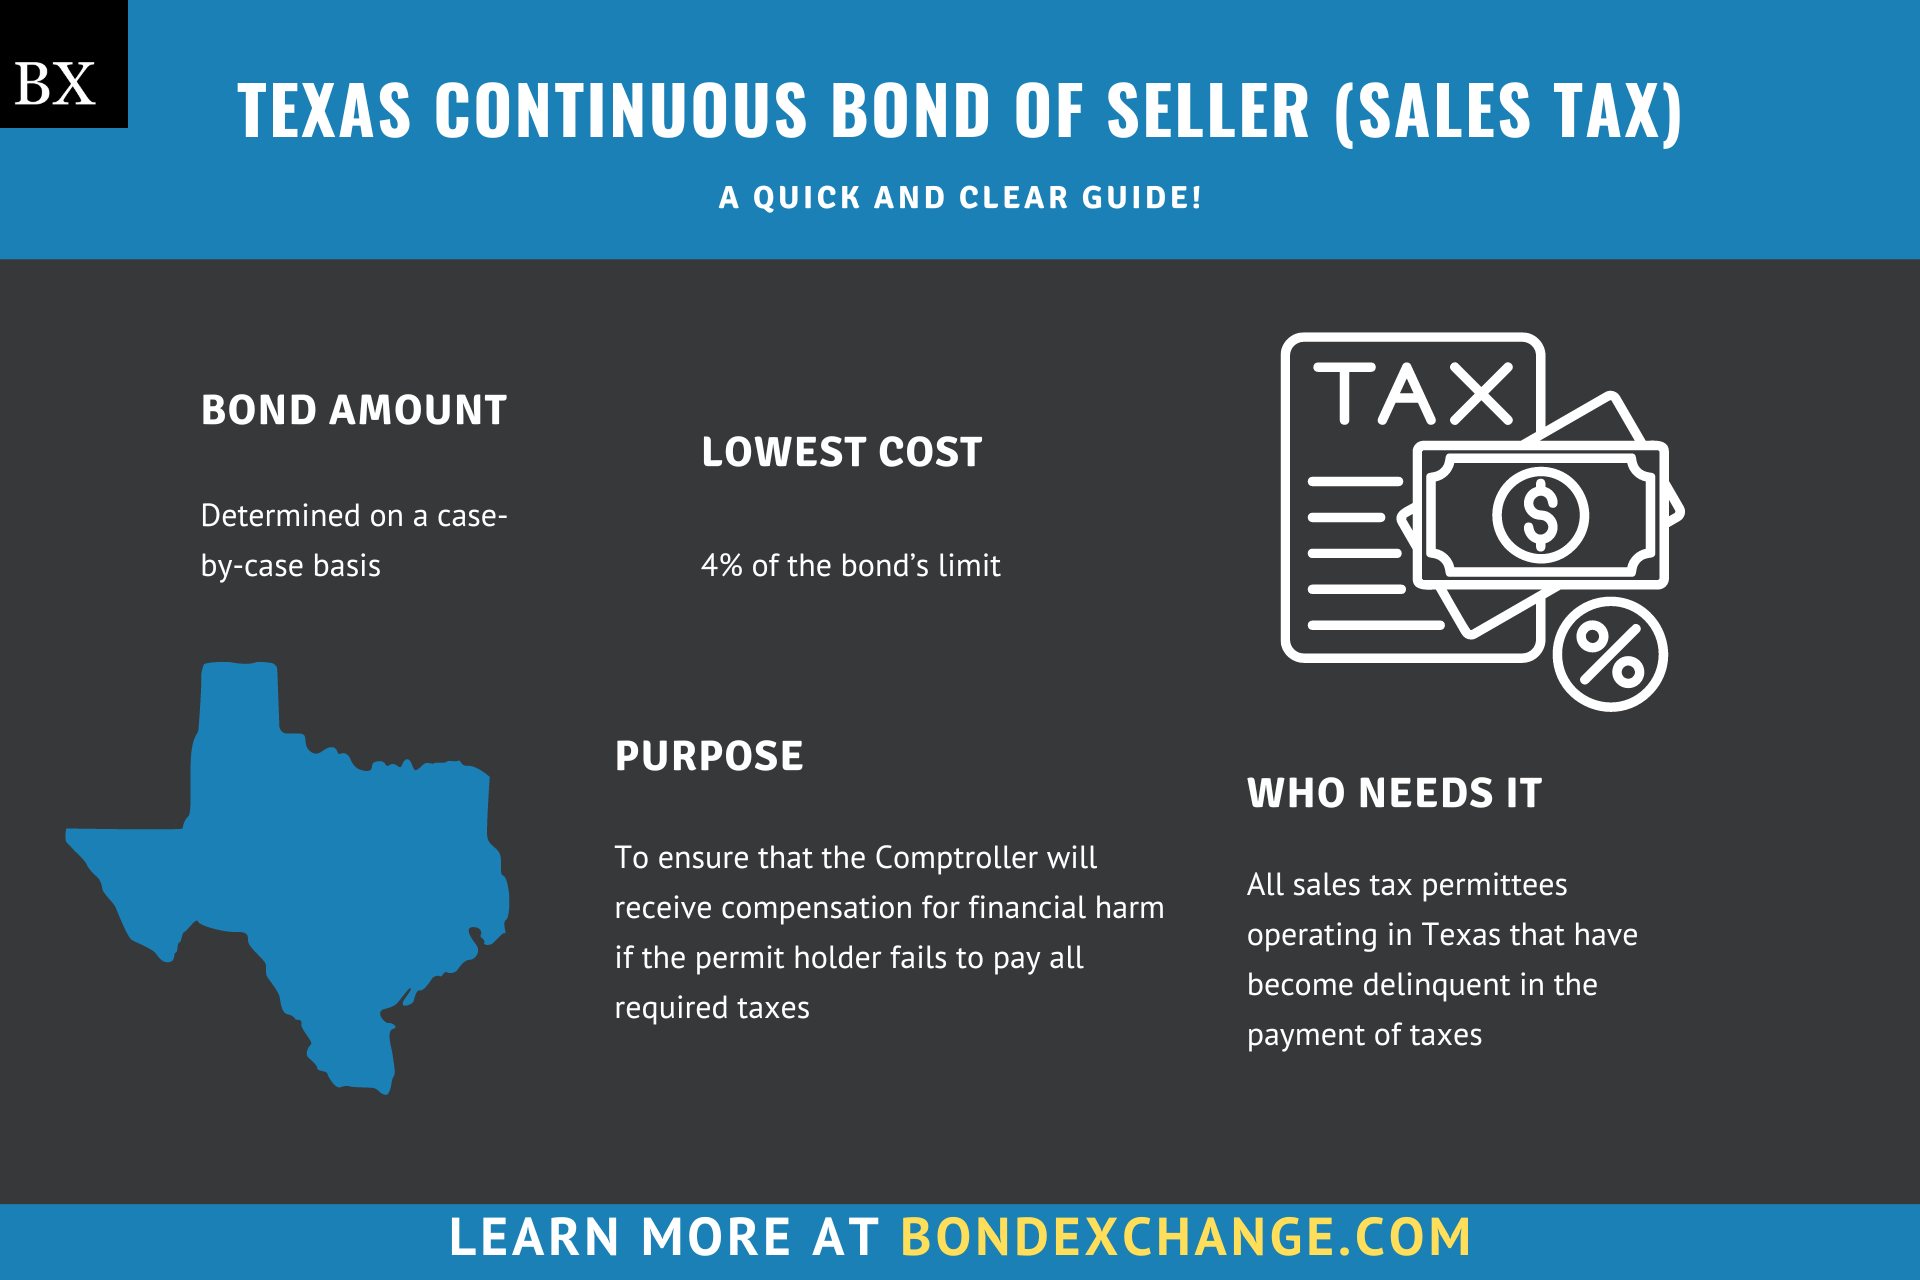 Texas Continuous Bond of Seller (Sales Tax)